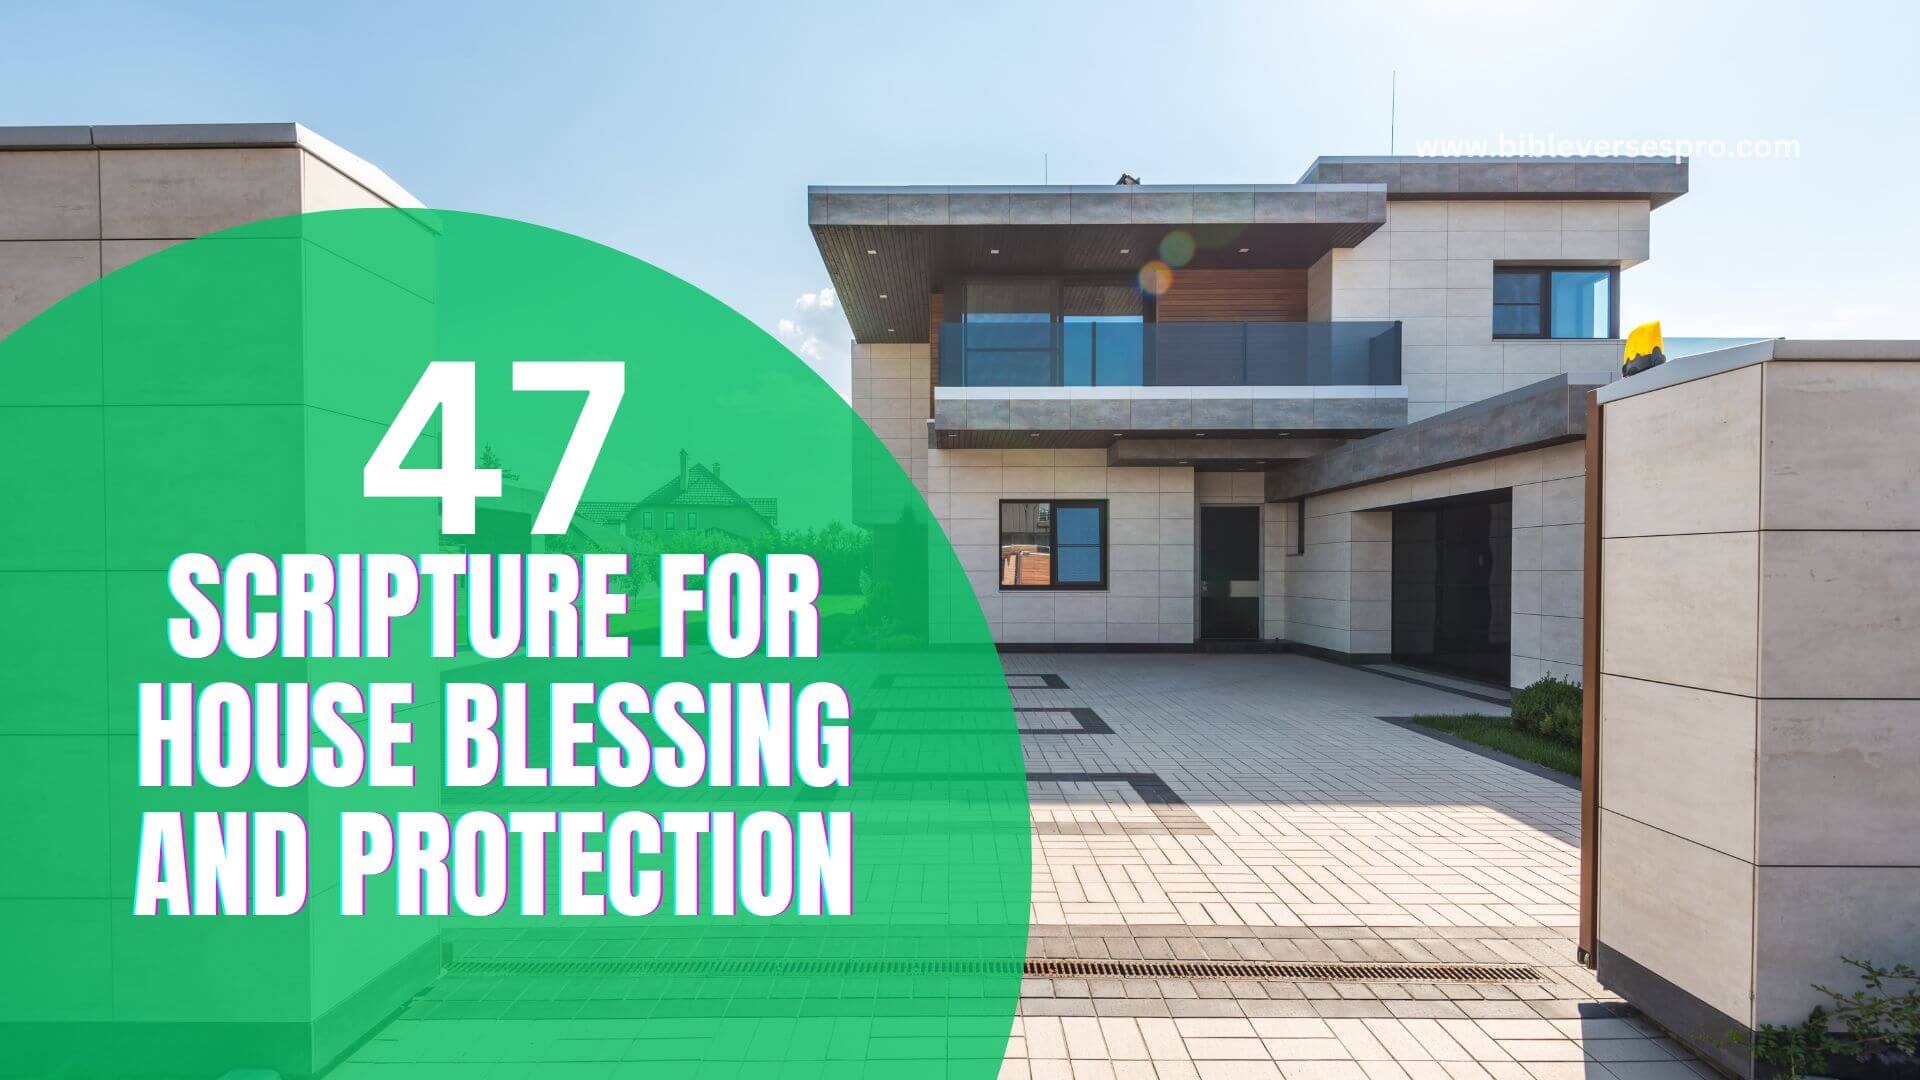 SCRIPTURE FOR HOUSE BLESSING AND PROTECTION (1)